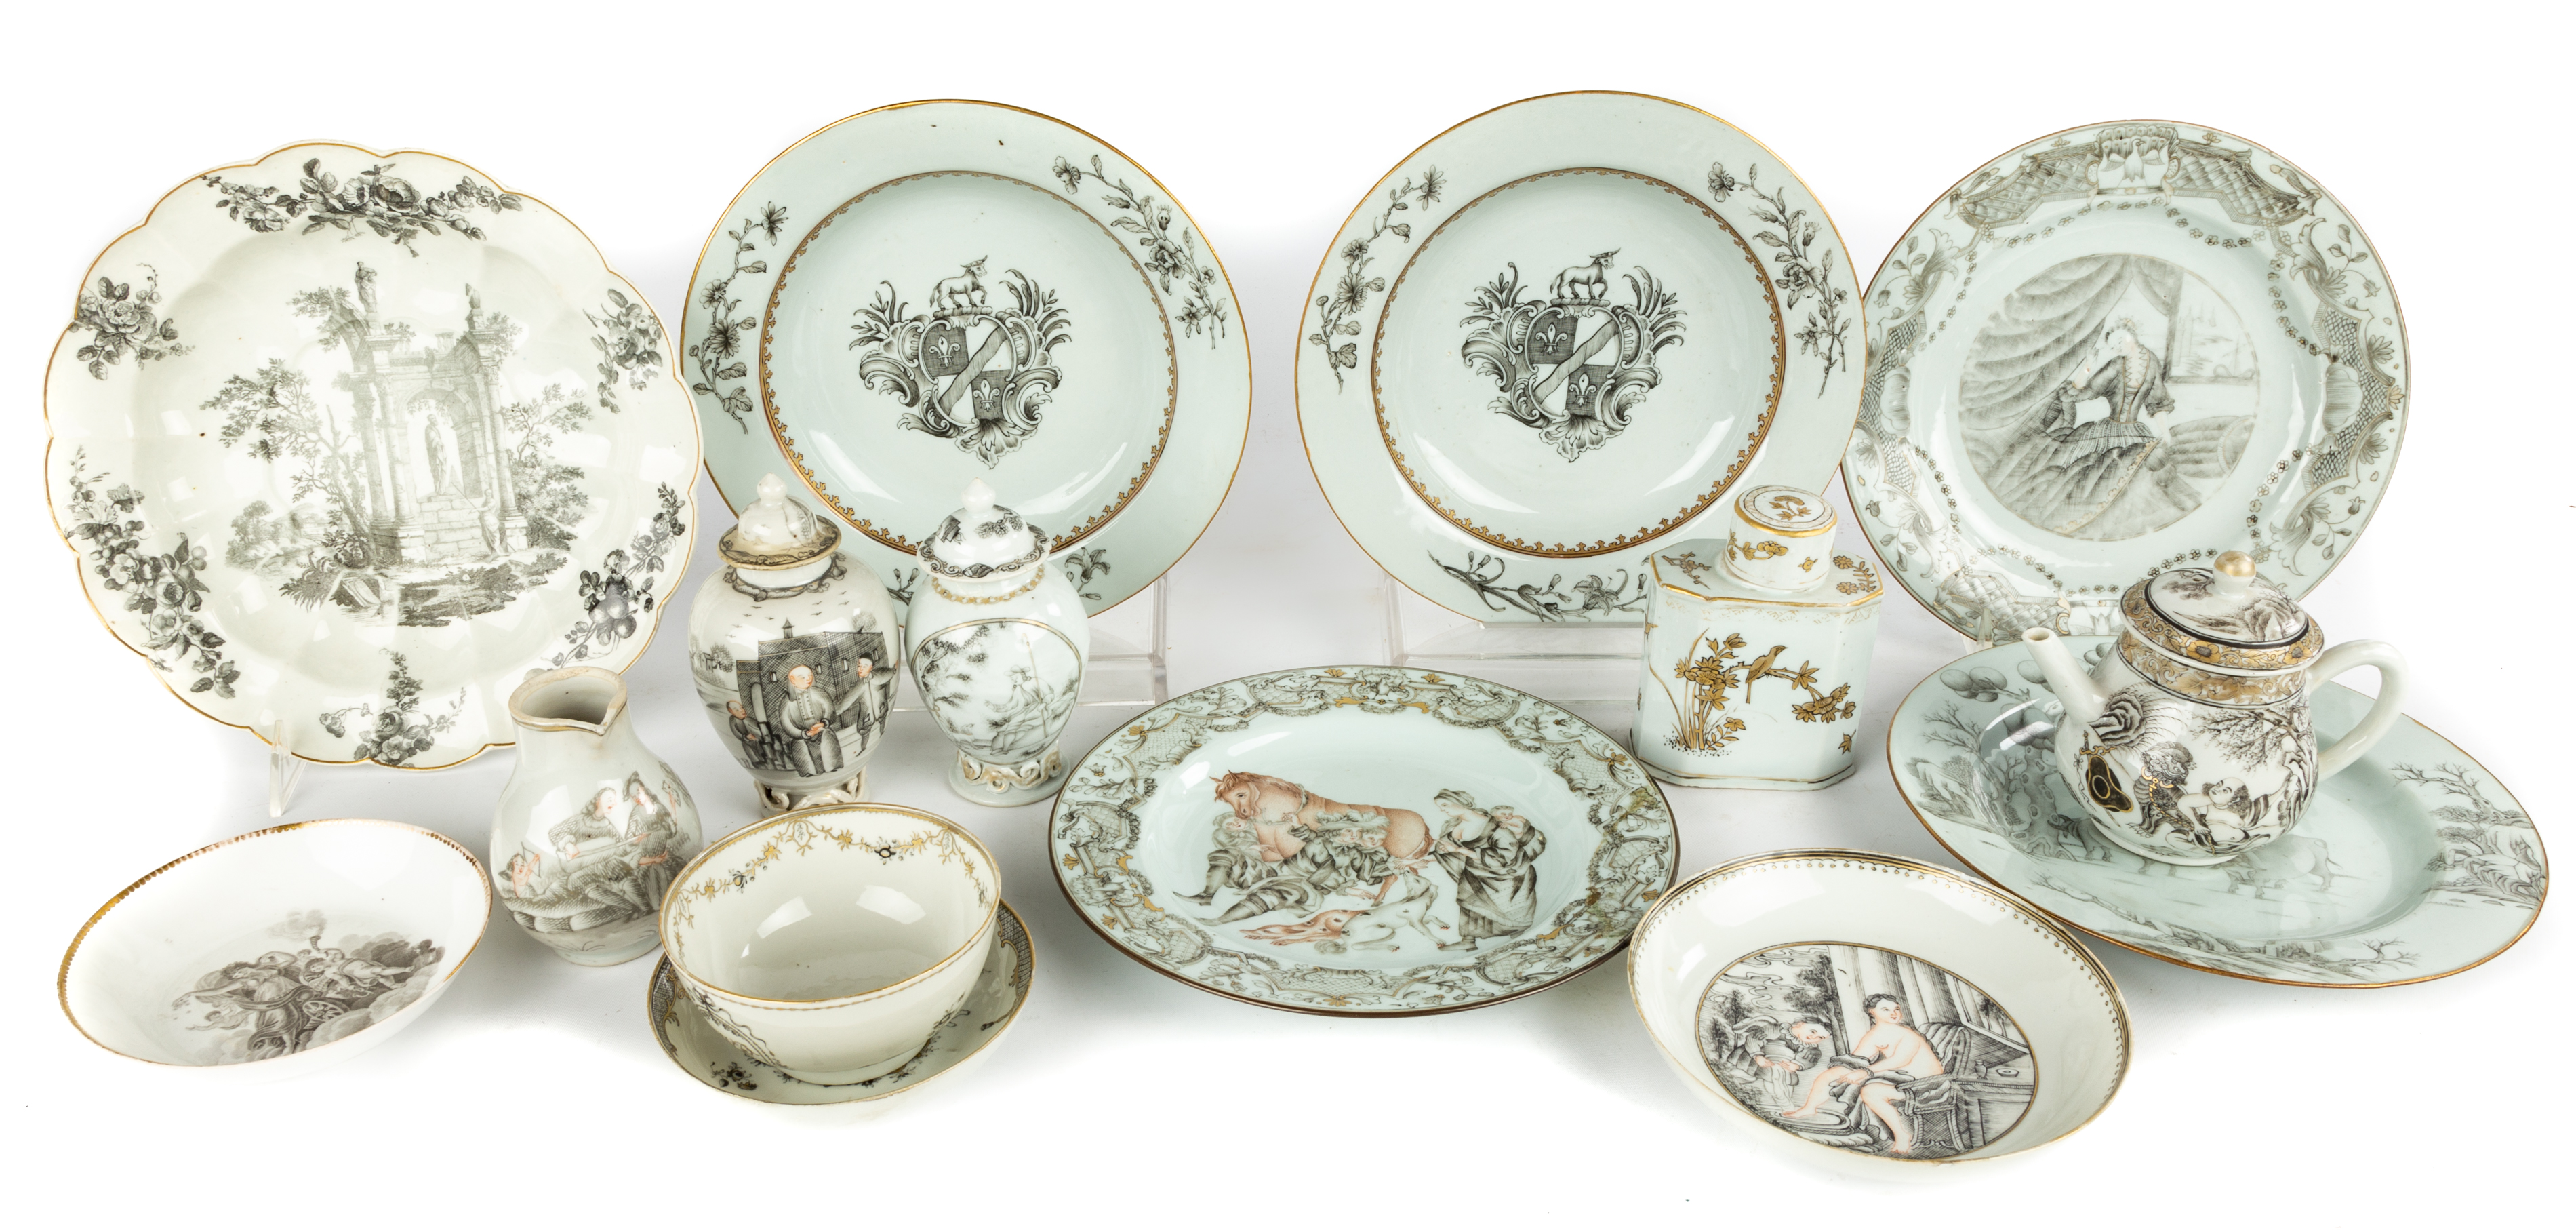 GROUP OF CHINESE EXPORT PORCELAIN 2c8791